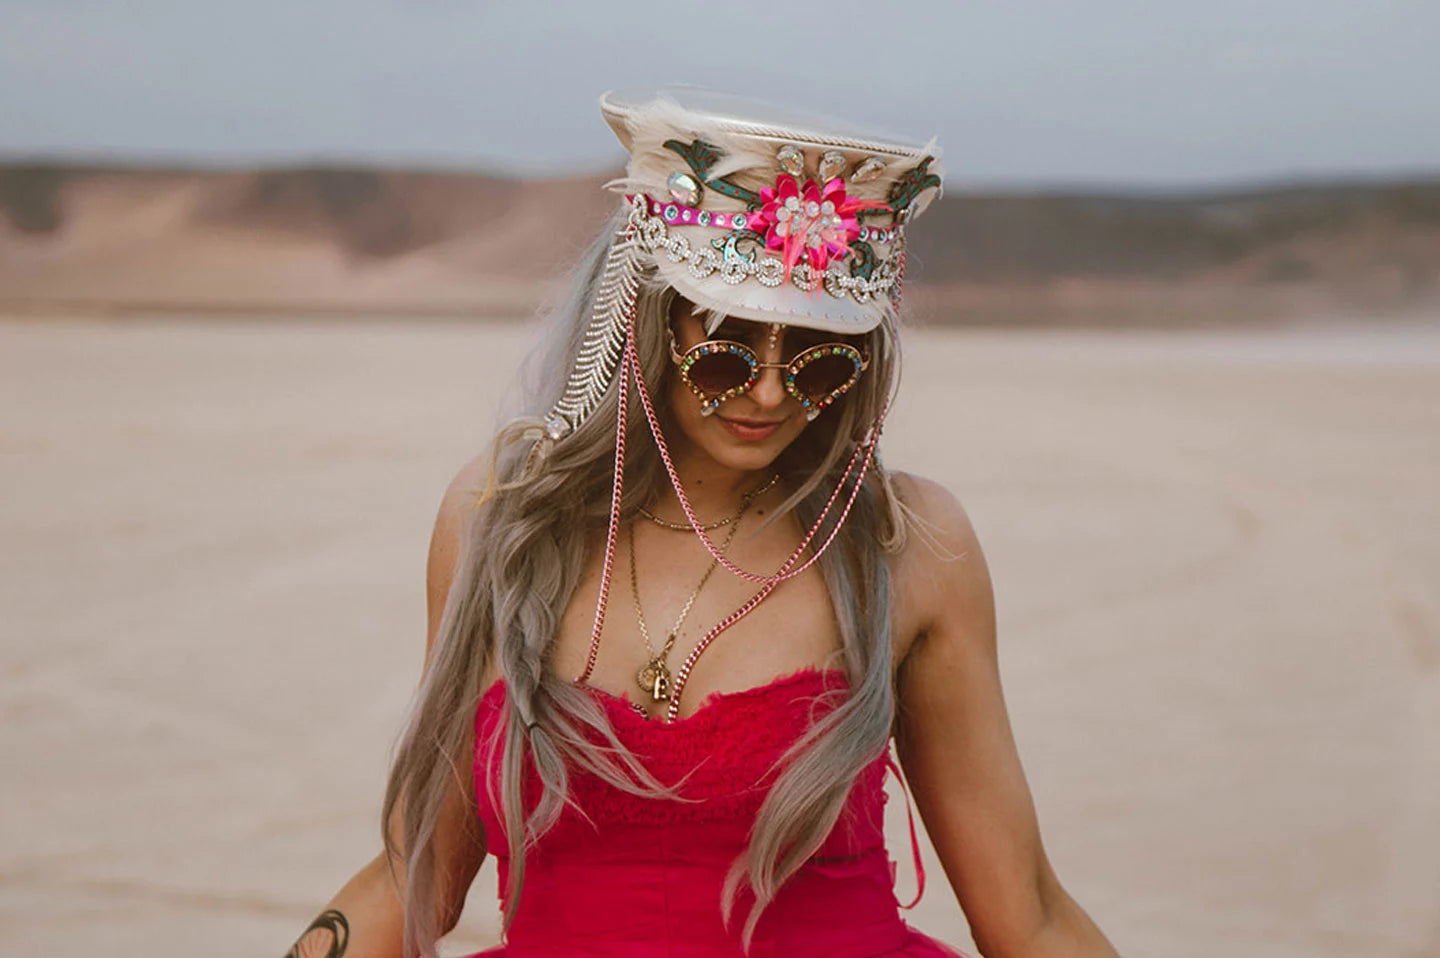 woman in a red dress in a desert wearing a festival hat by american hat makers